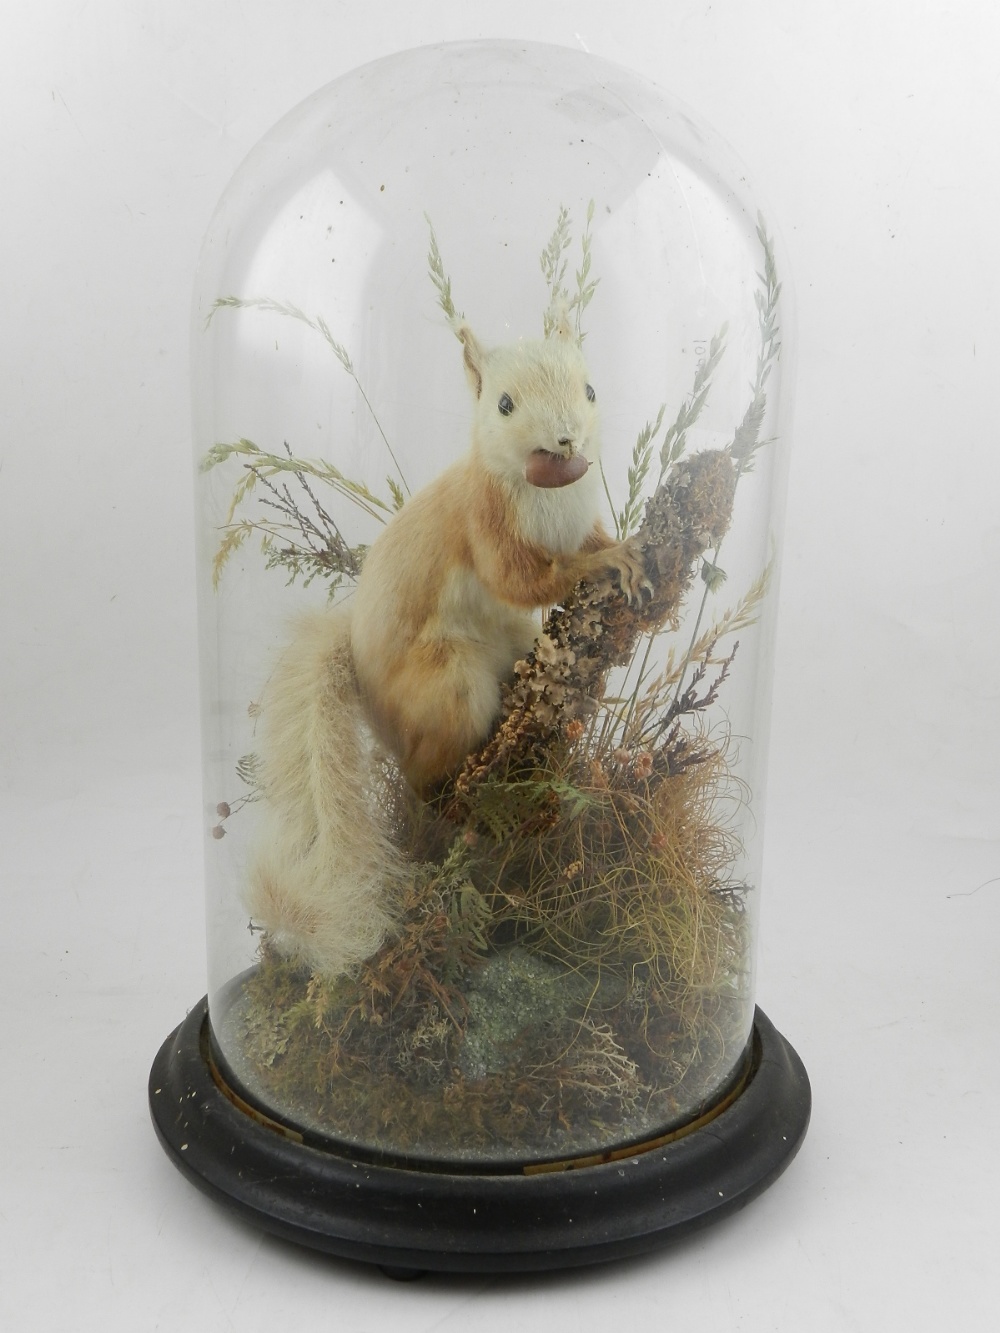 An early 20th century taxidermy study of a squirrel, under a glass dome, raised on wooden plinth.